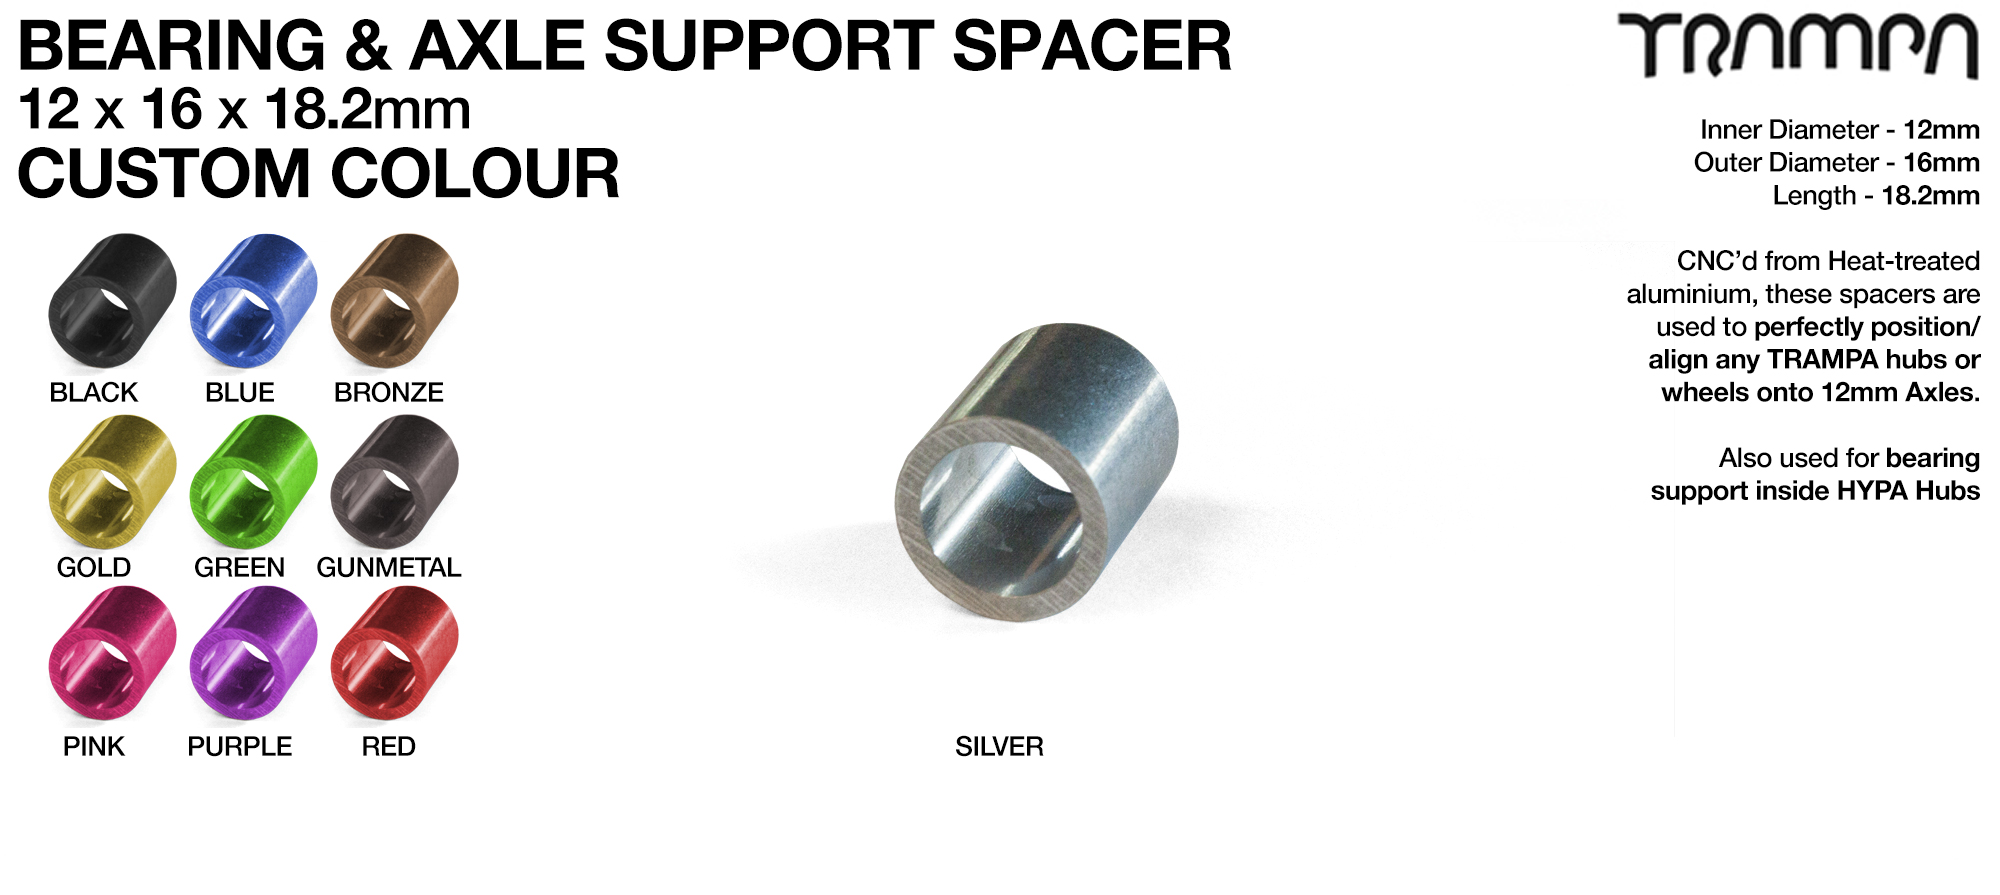 Wheel support spacer for all TRAMPA Wheels on 12mm ATB Axles - CNC precision 12mm x 16mm x 18.2mm - CUSTOM